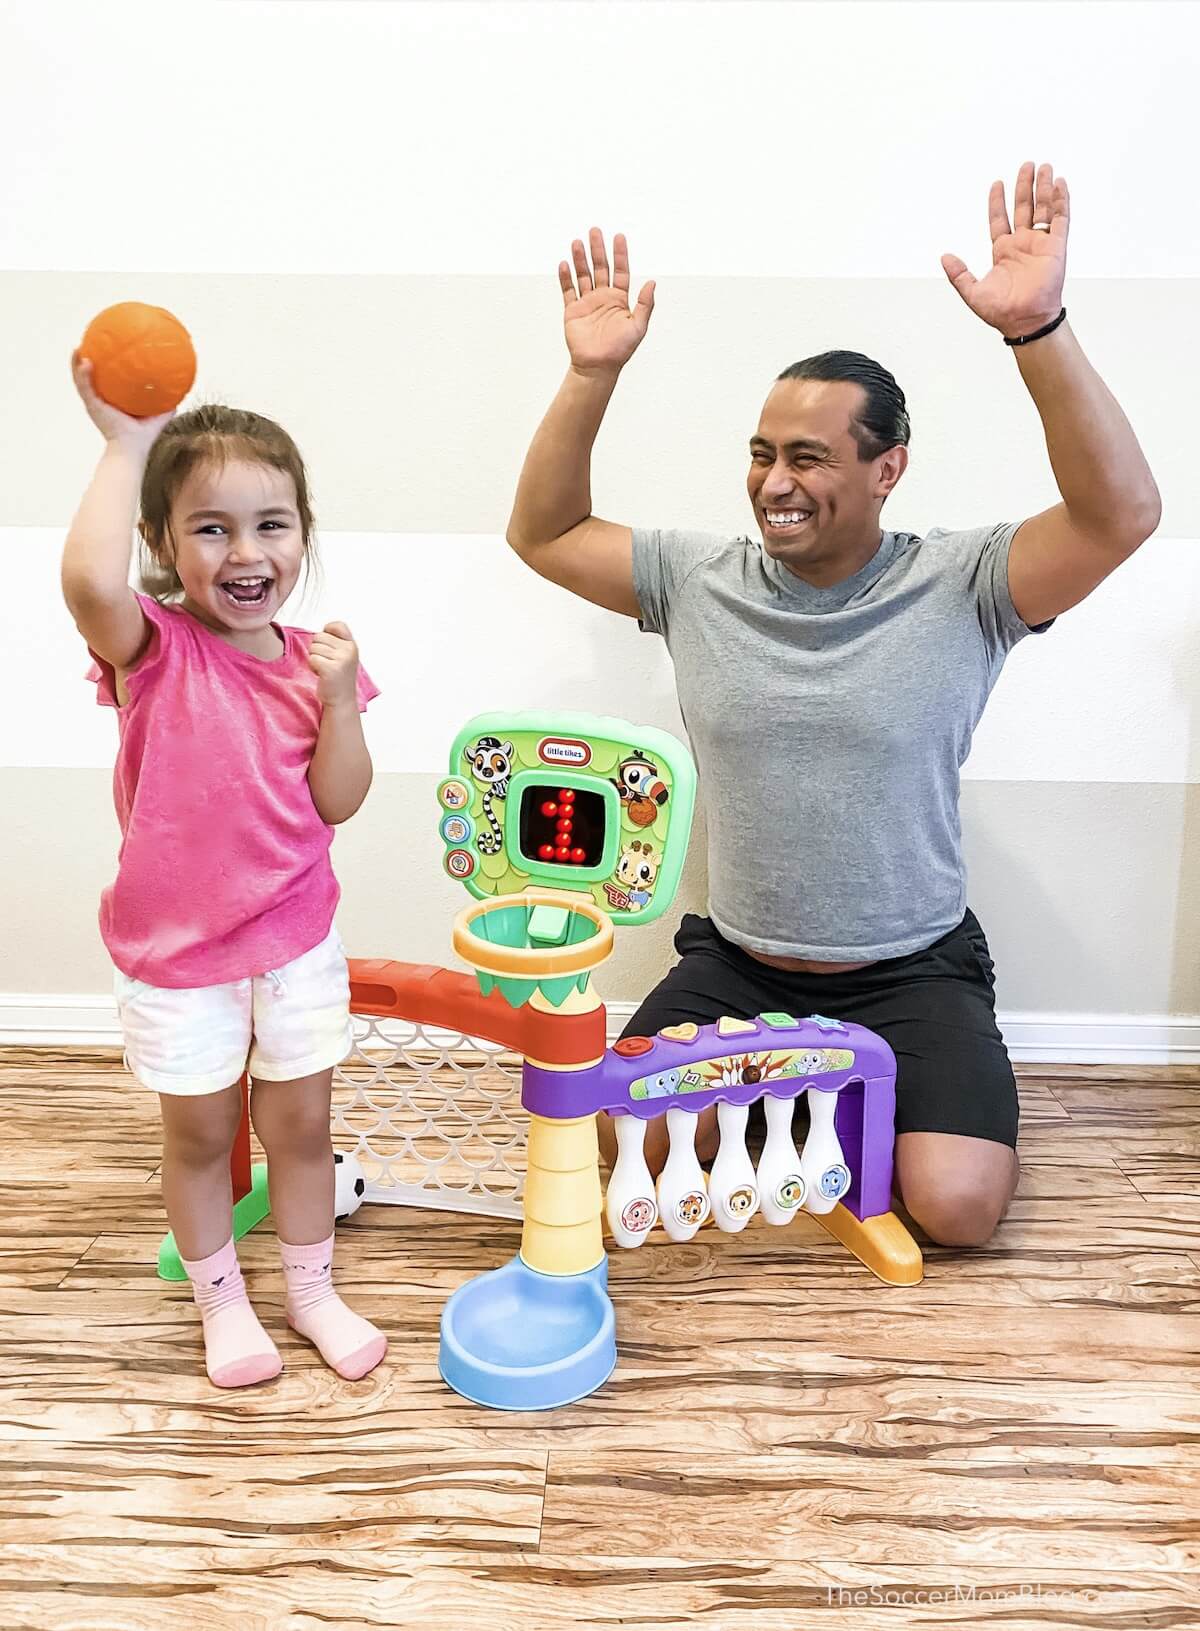 little girl playing basketball with her dad